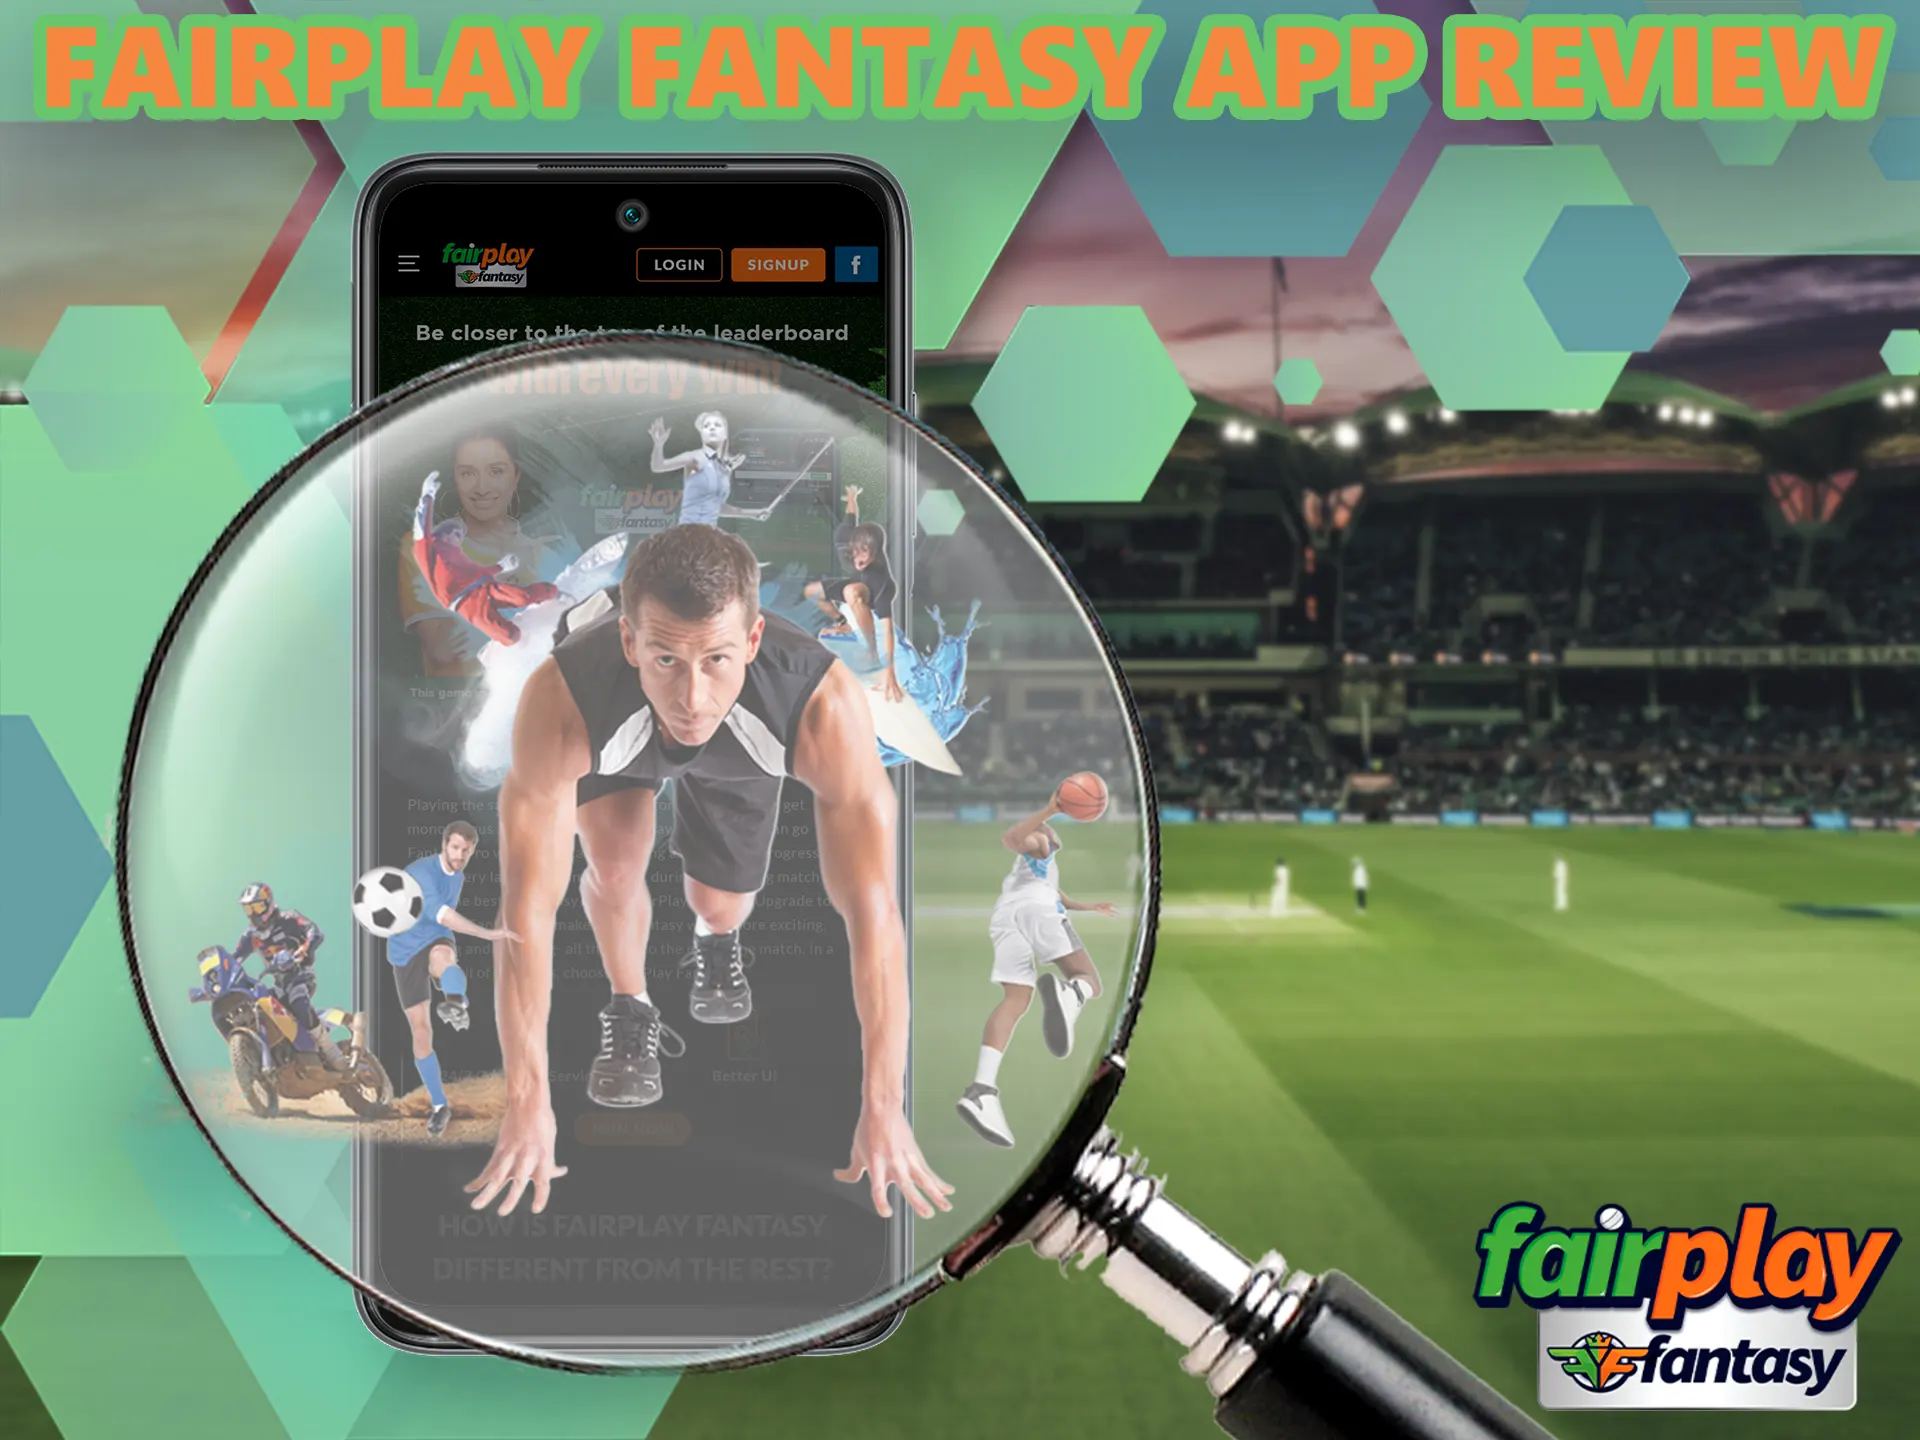 The Fairplay Fantasy app helps players embrace the culture of fantasy sports, create their own teams and have fun.